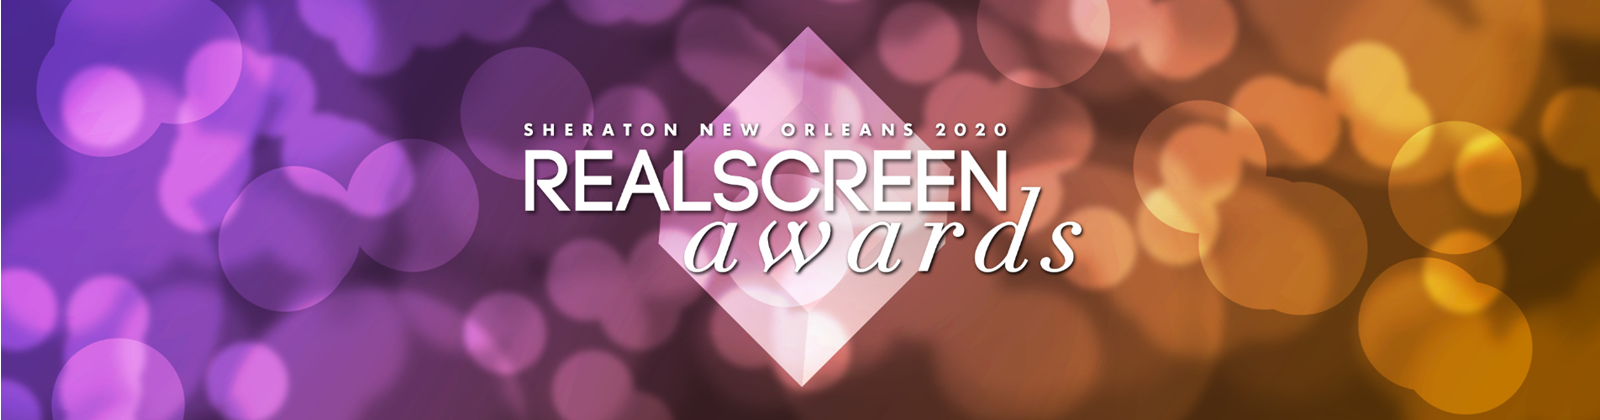 Firecracker Films and A. Smith & Co pick up 2020 Realscreen Awards nominations